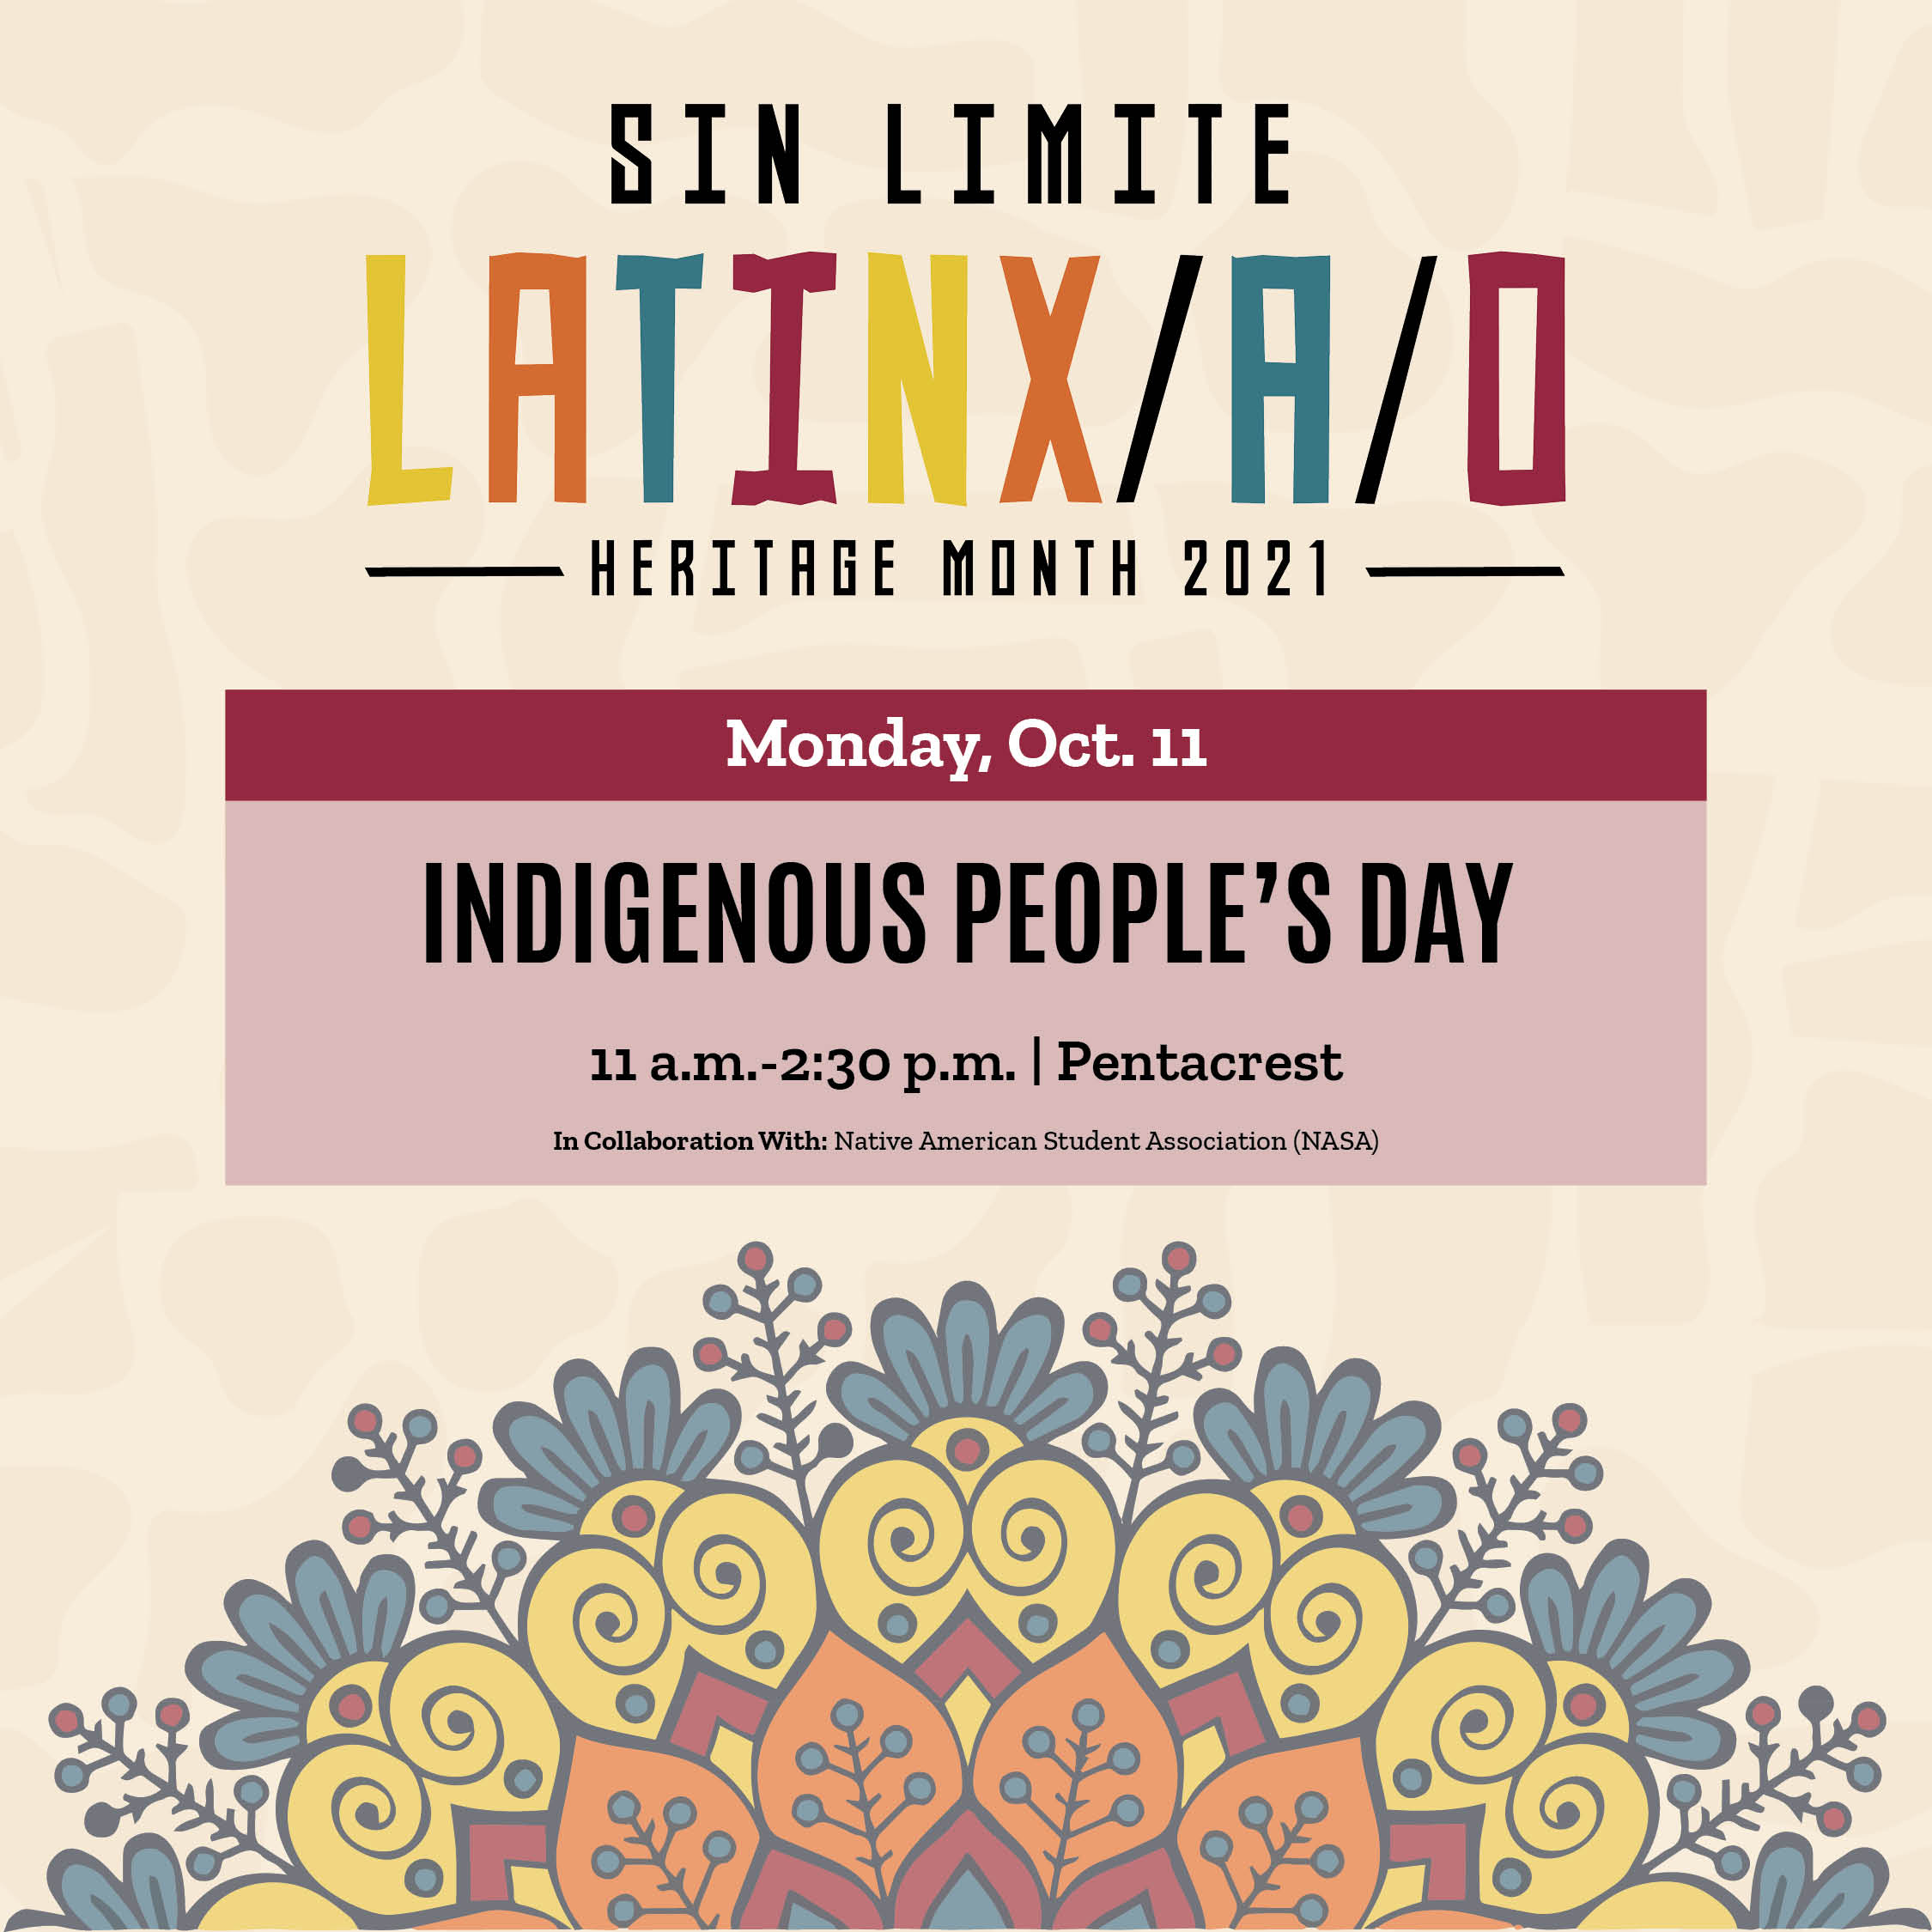 A floral design graphic with text that says 'SIN LIMITE LATINX/A/O HERITAGE MONTH 2021 Monday, Oct. 11 INDIGENOUS PEOPLE'S DAY 11 a.m.-2:30 p.m. Pentacrest With: Native American Student (NASA)'